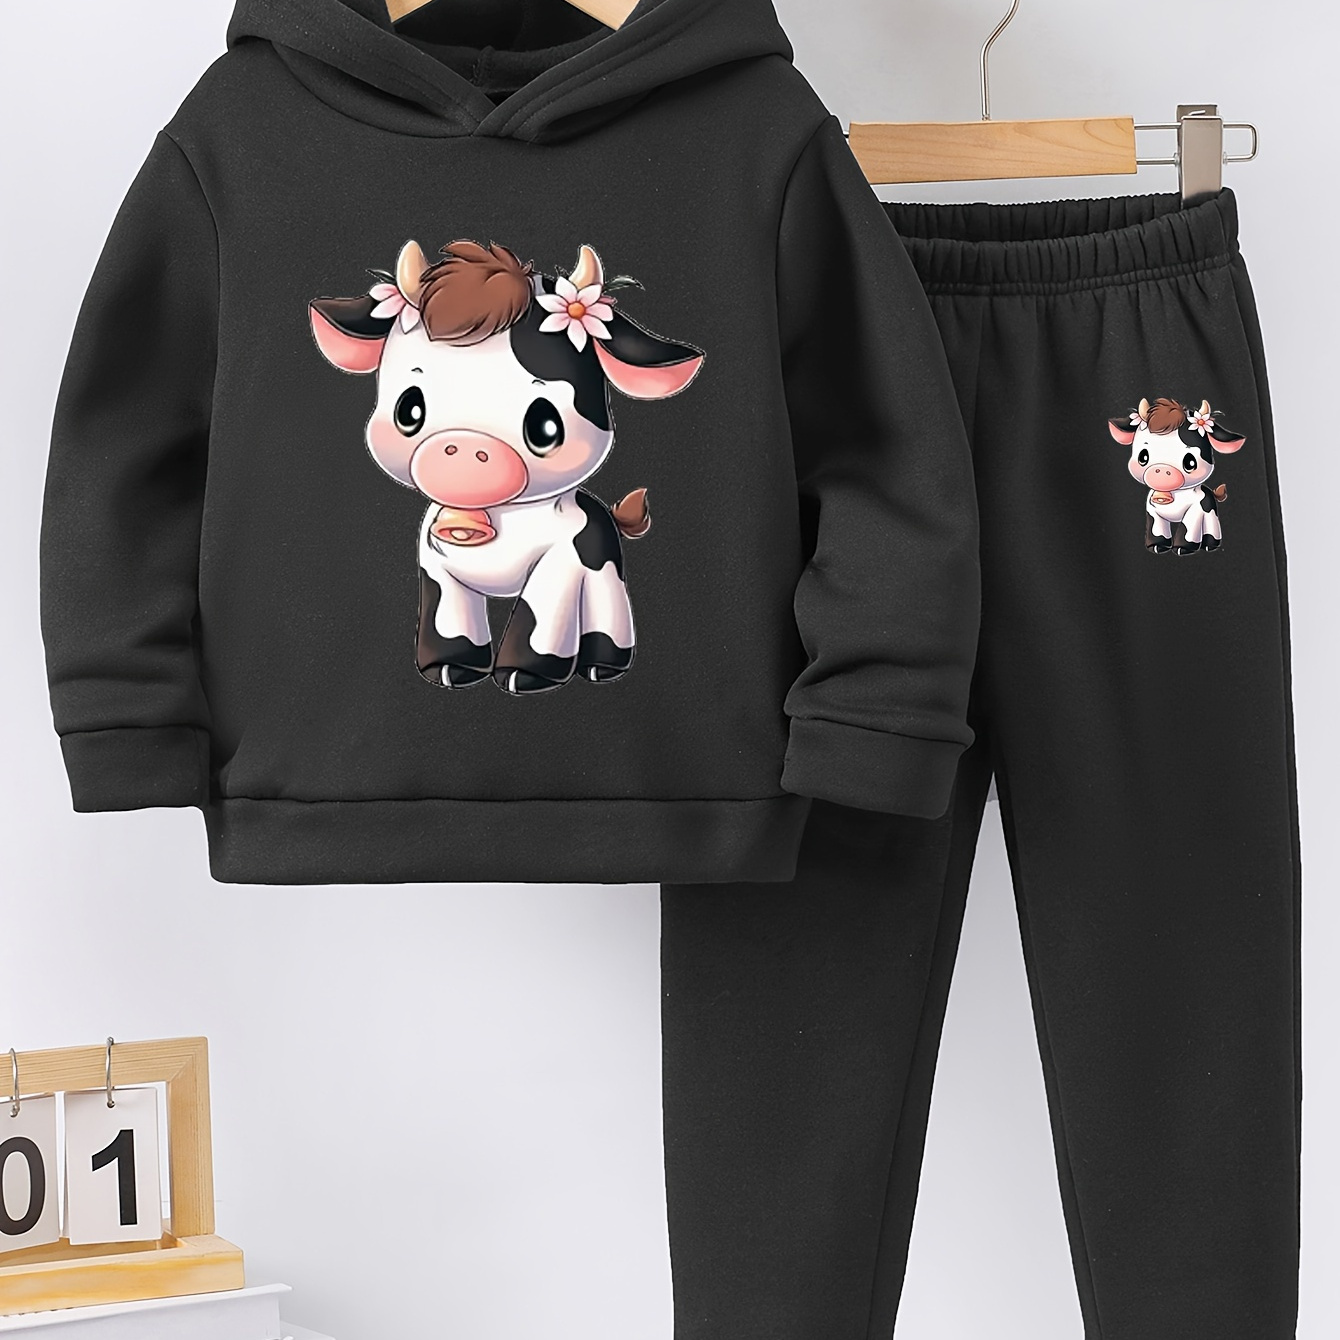 

Adorable Cartoon Cow Graphic Print, Girl's Casual 2 Pcs Co-ord Set, Round Neck Long Sleeve Warm Fleece Hoodie & Comfy Versatile Sweatpants, Ideal For Daily And Outdoor Wear, Fall And Winter